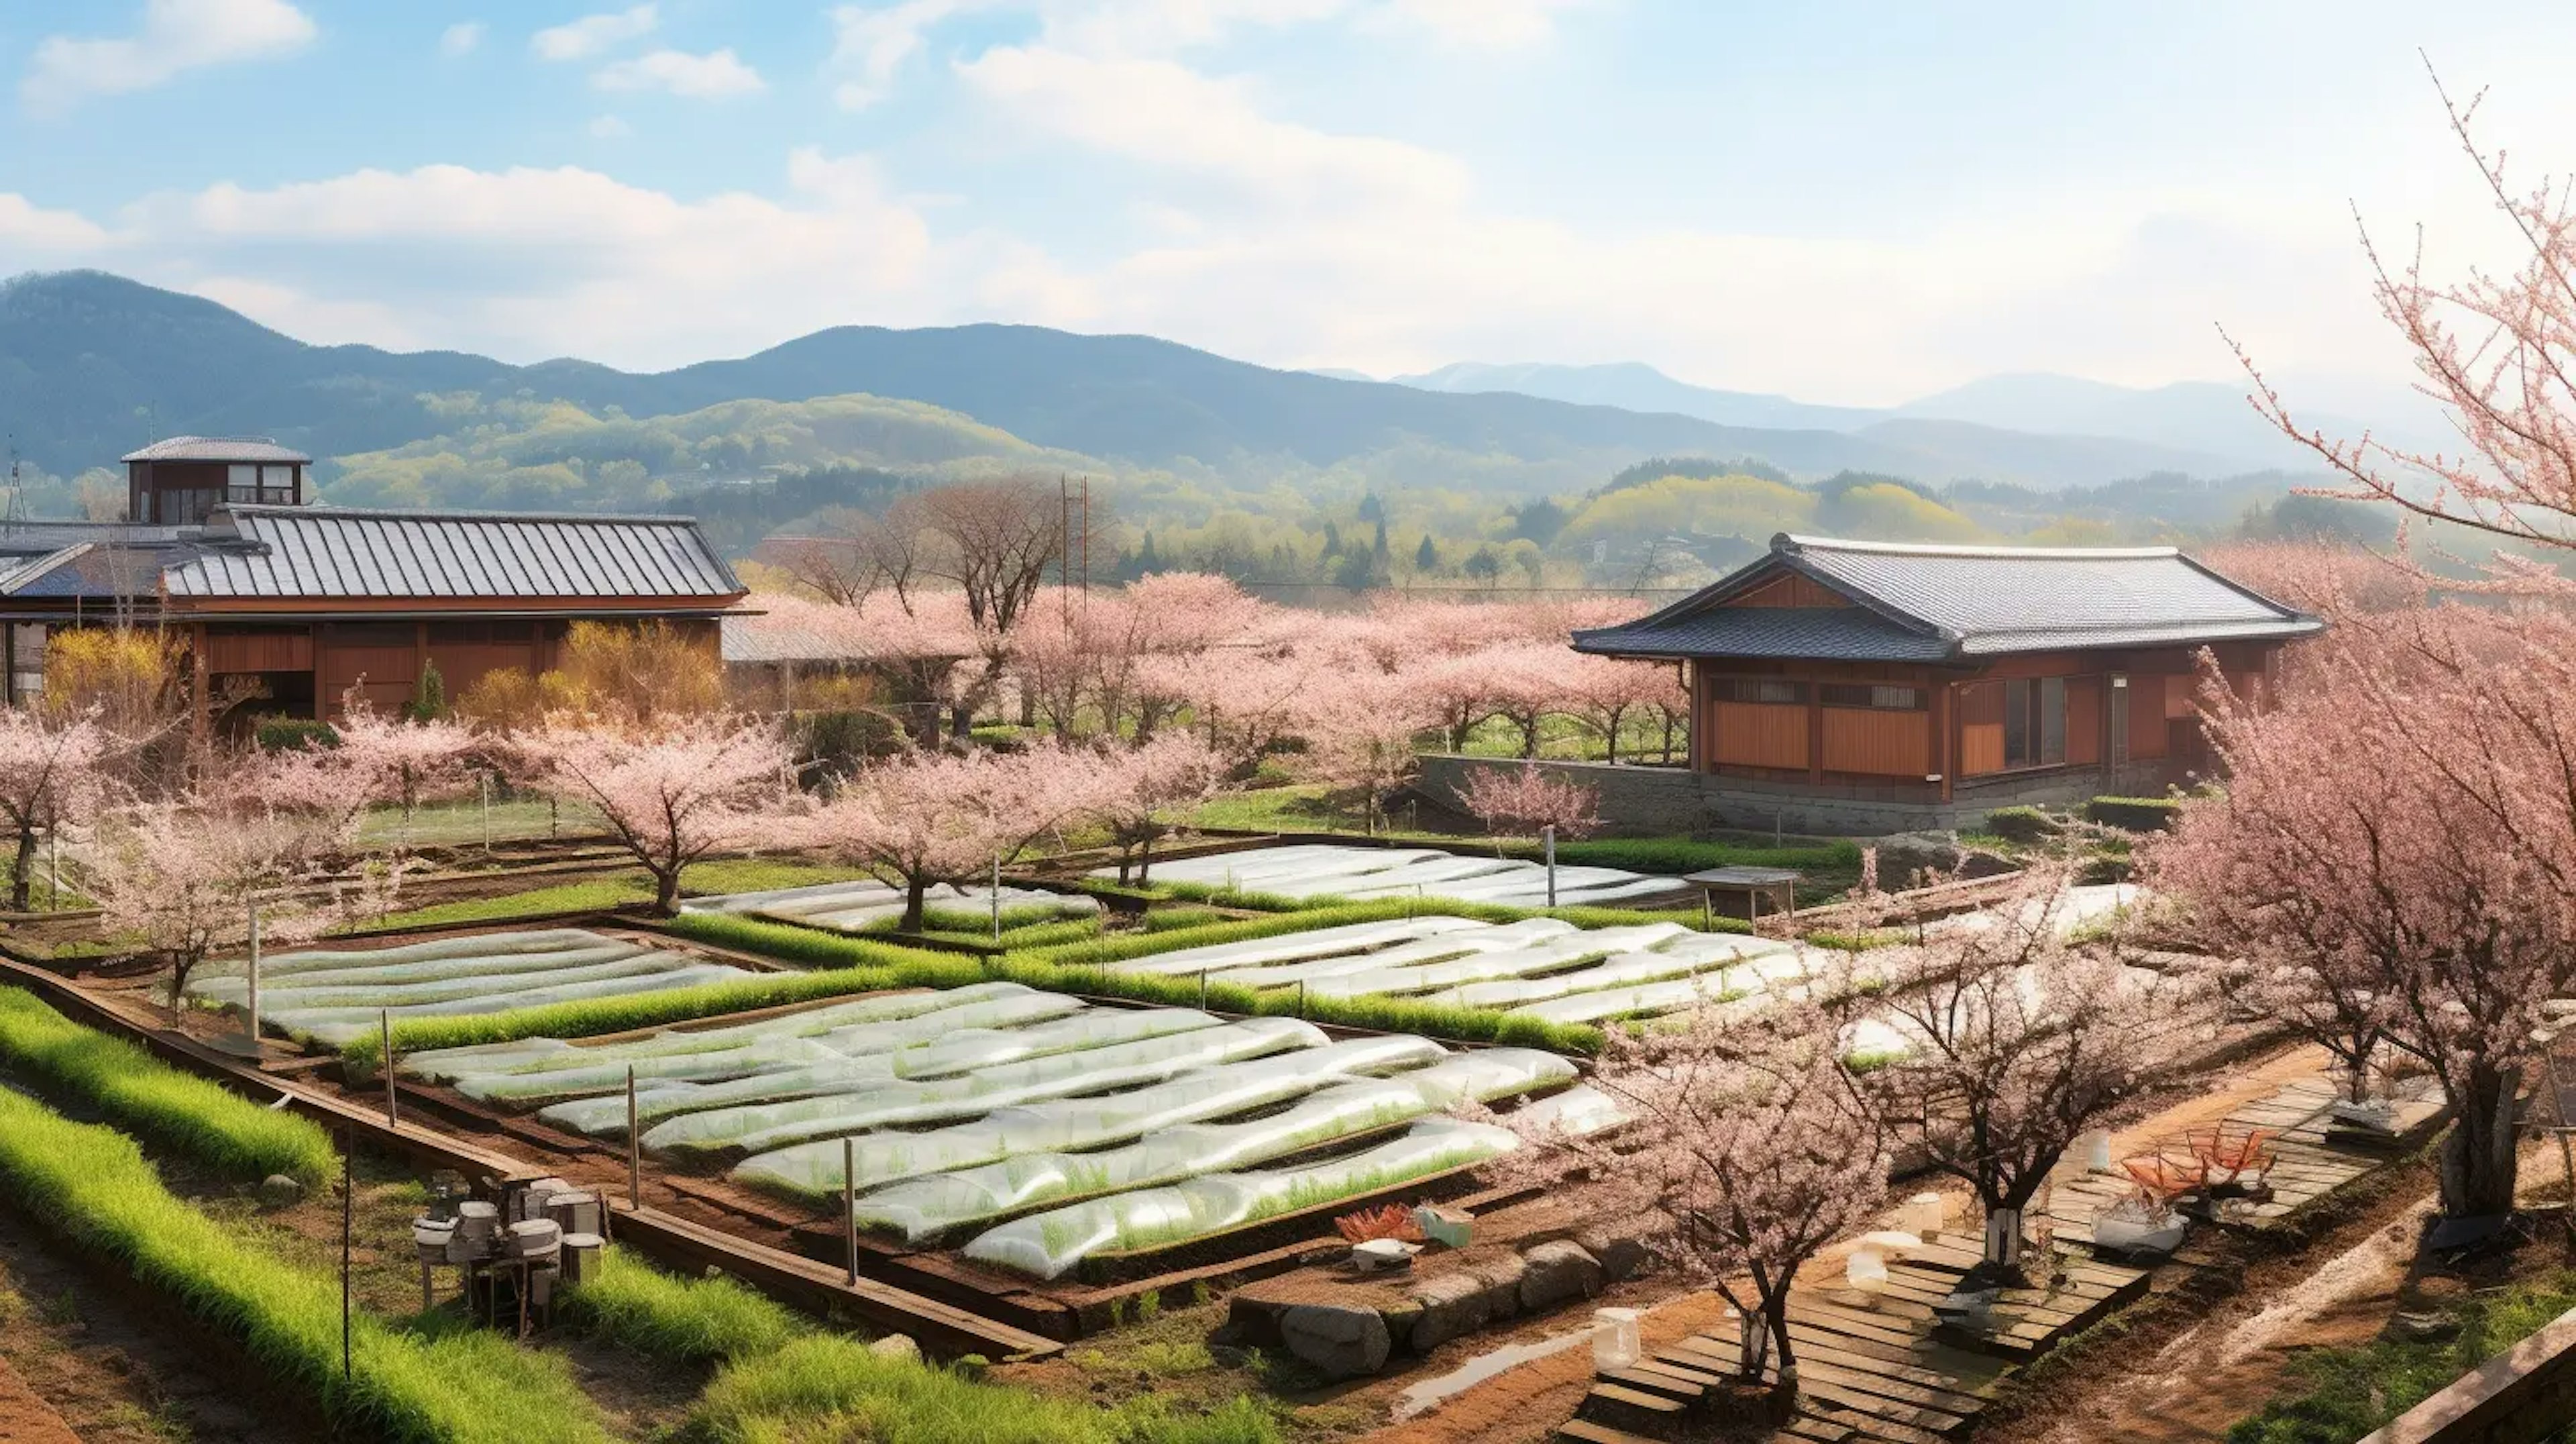 panoramic view of a kyoto farm during cherry blossom season